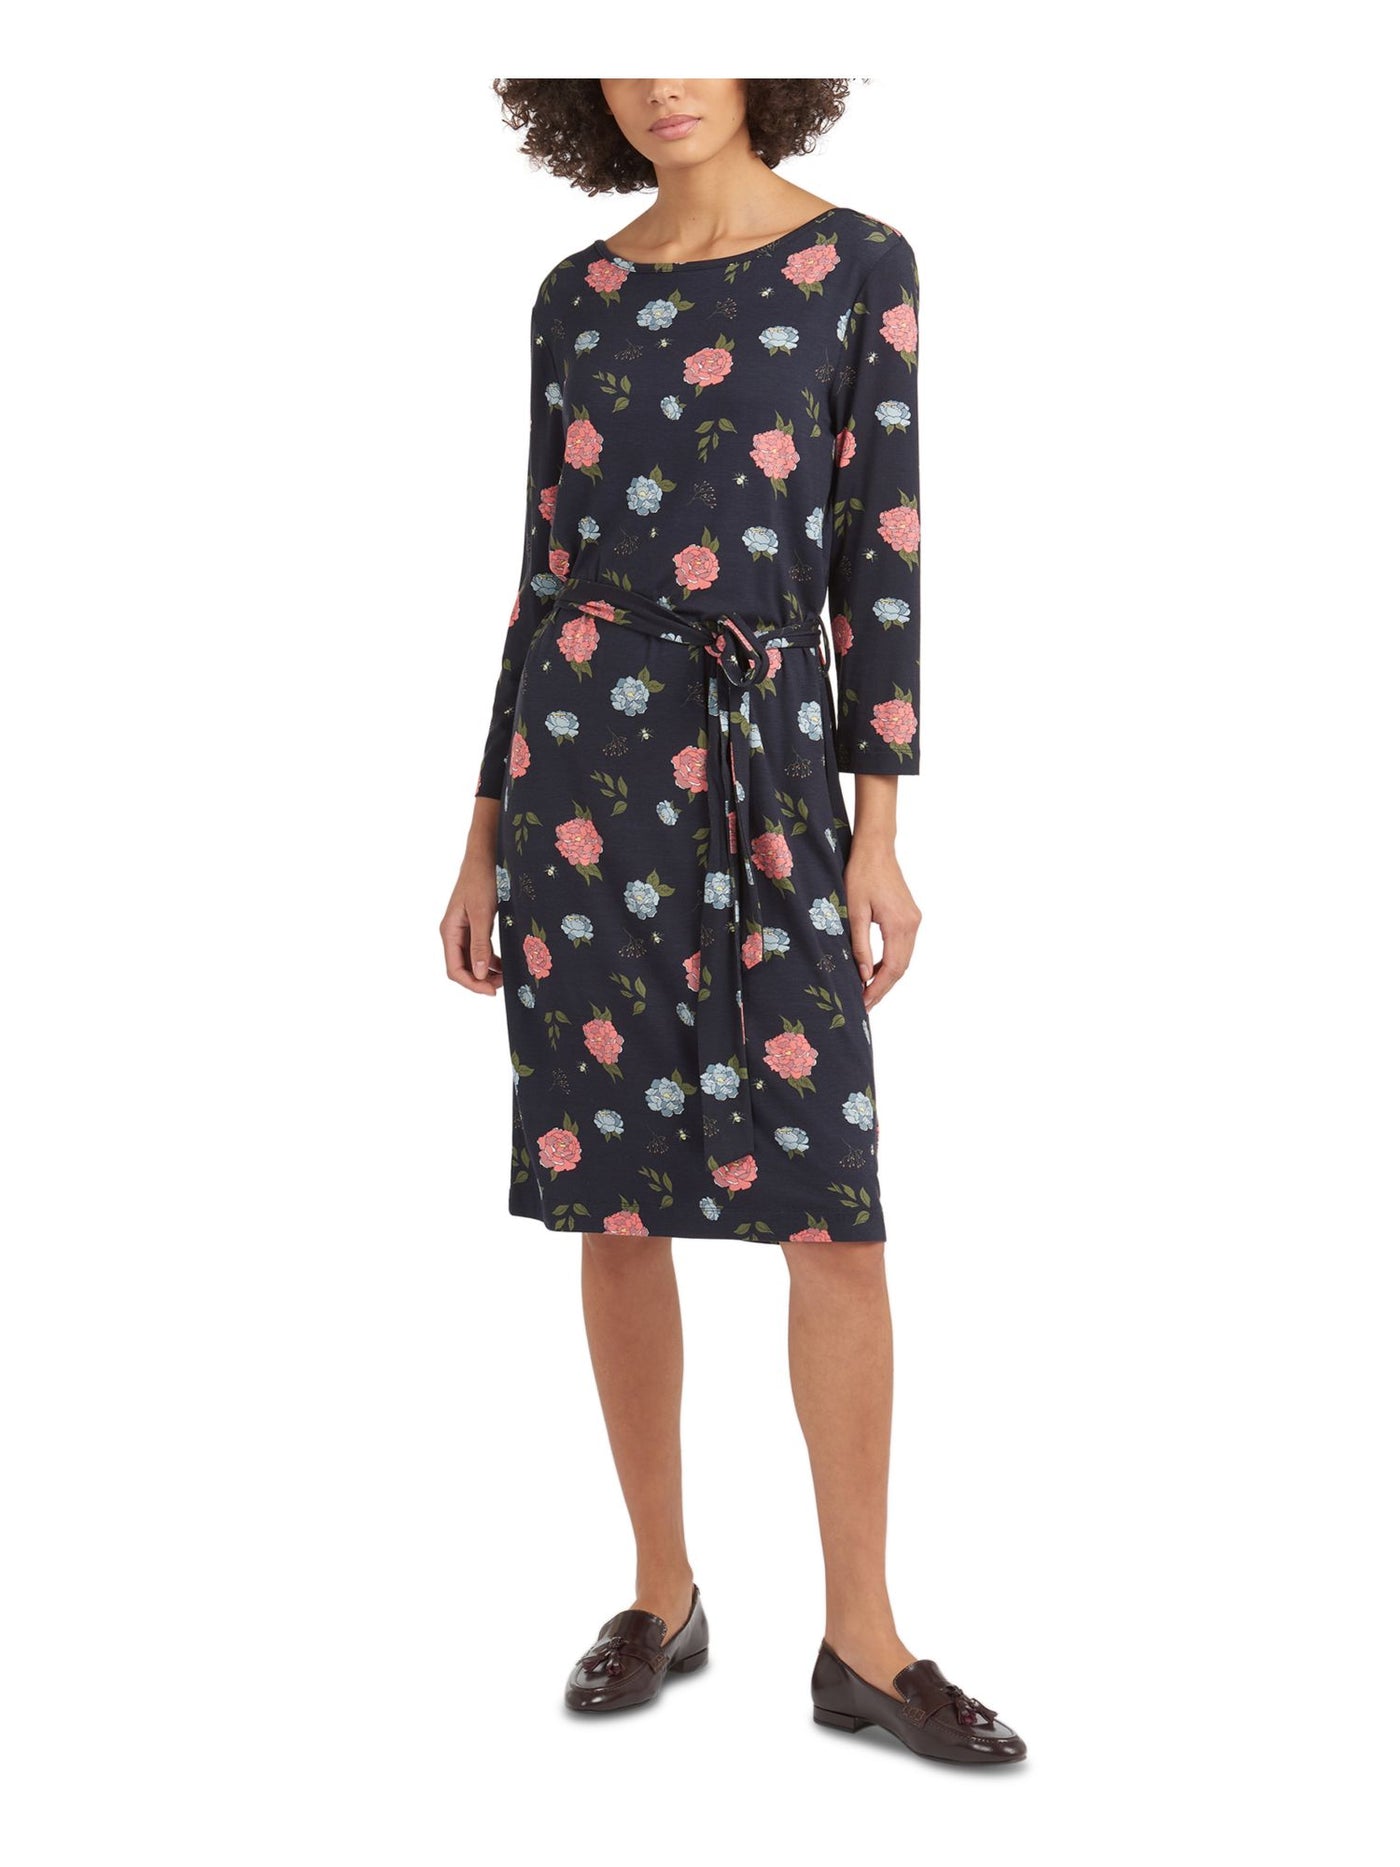 BARBOUR Womens Navy Stretch Floral 3/4 Sleeve Jewel Neck Above The Knee Wear To Work Sheath Dress 6